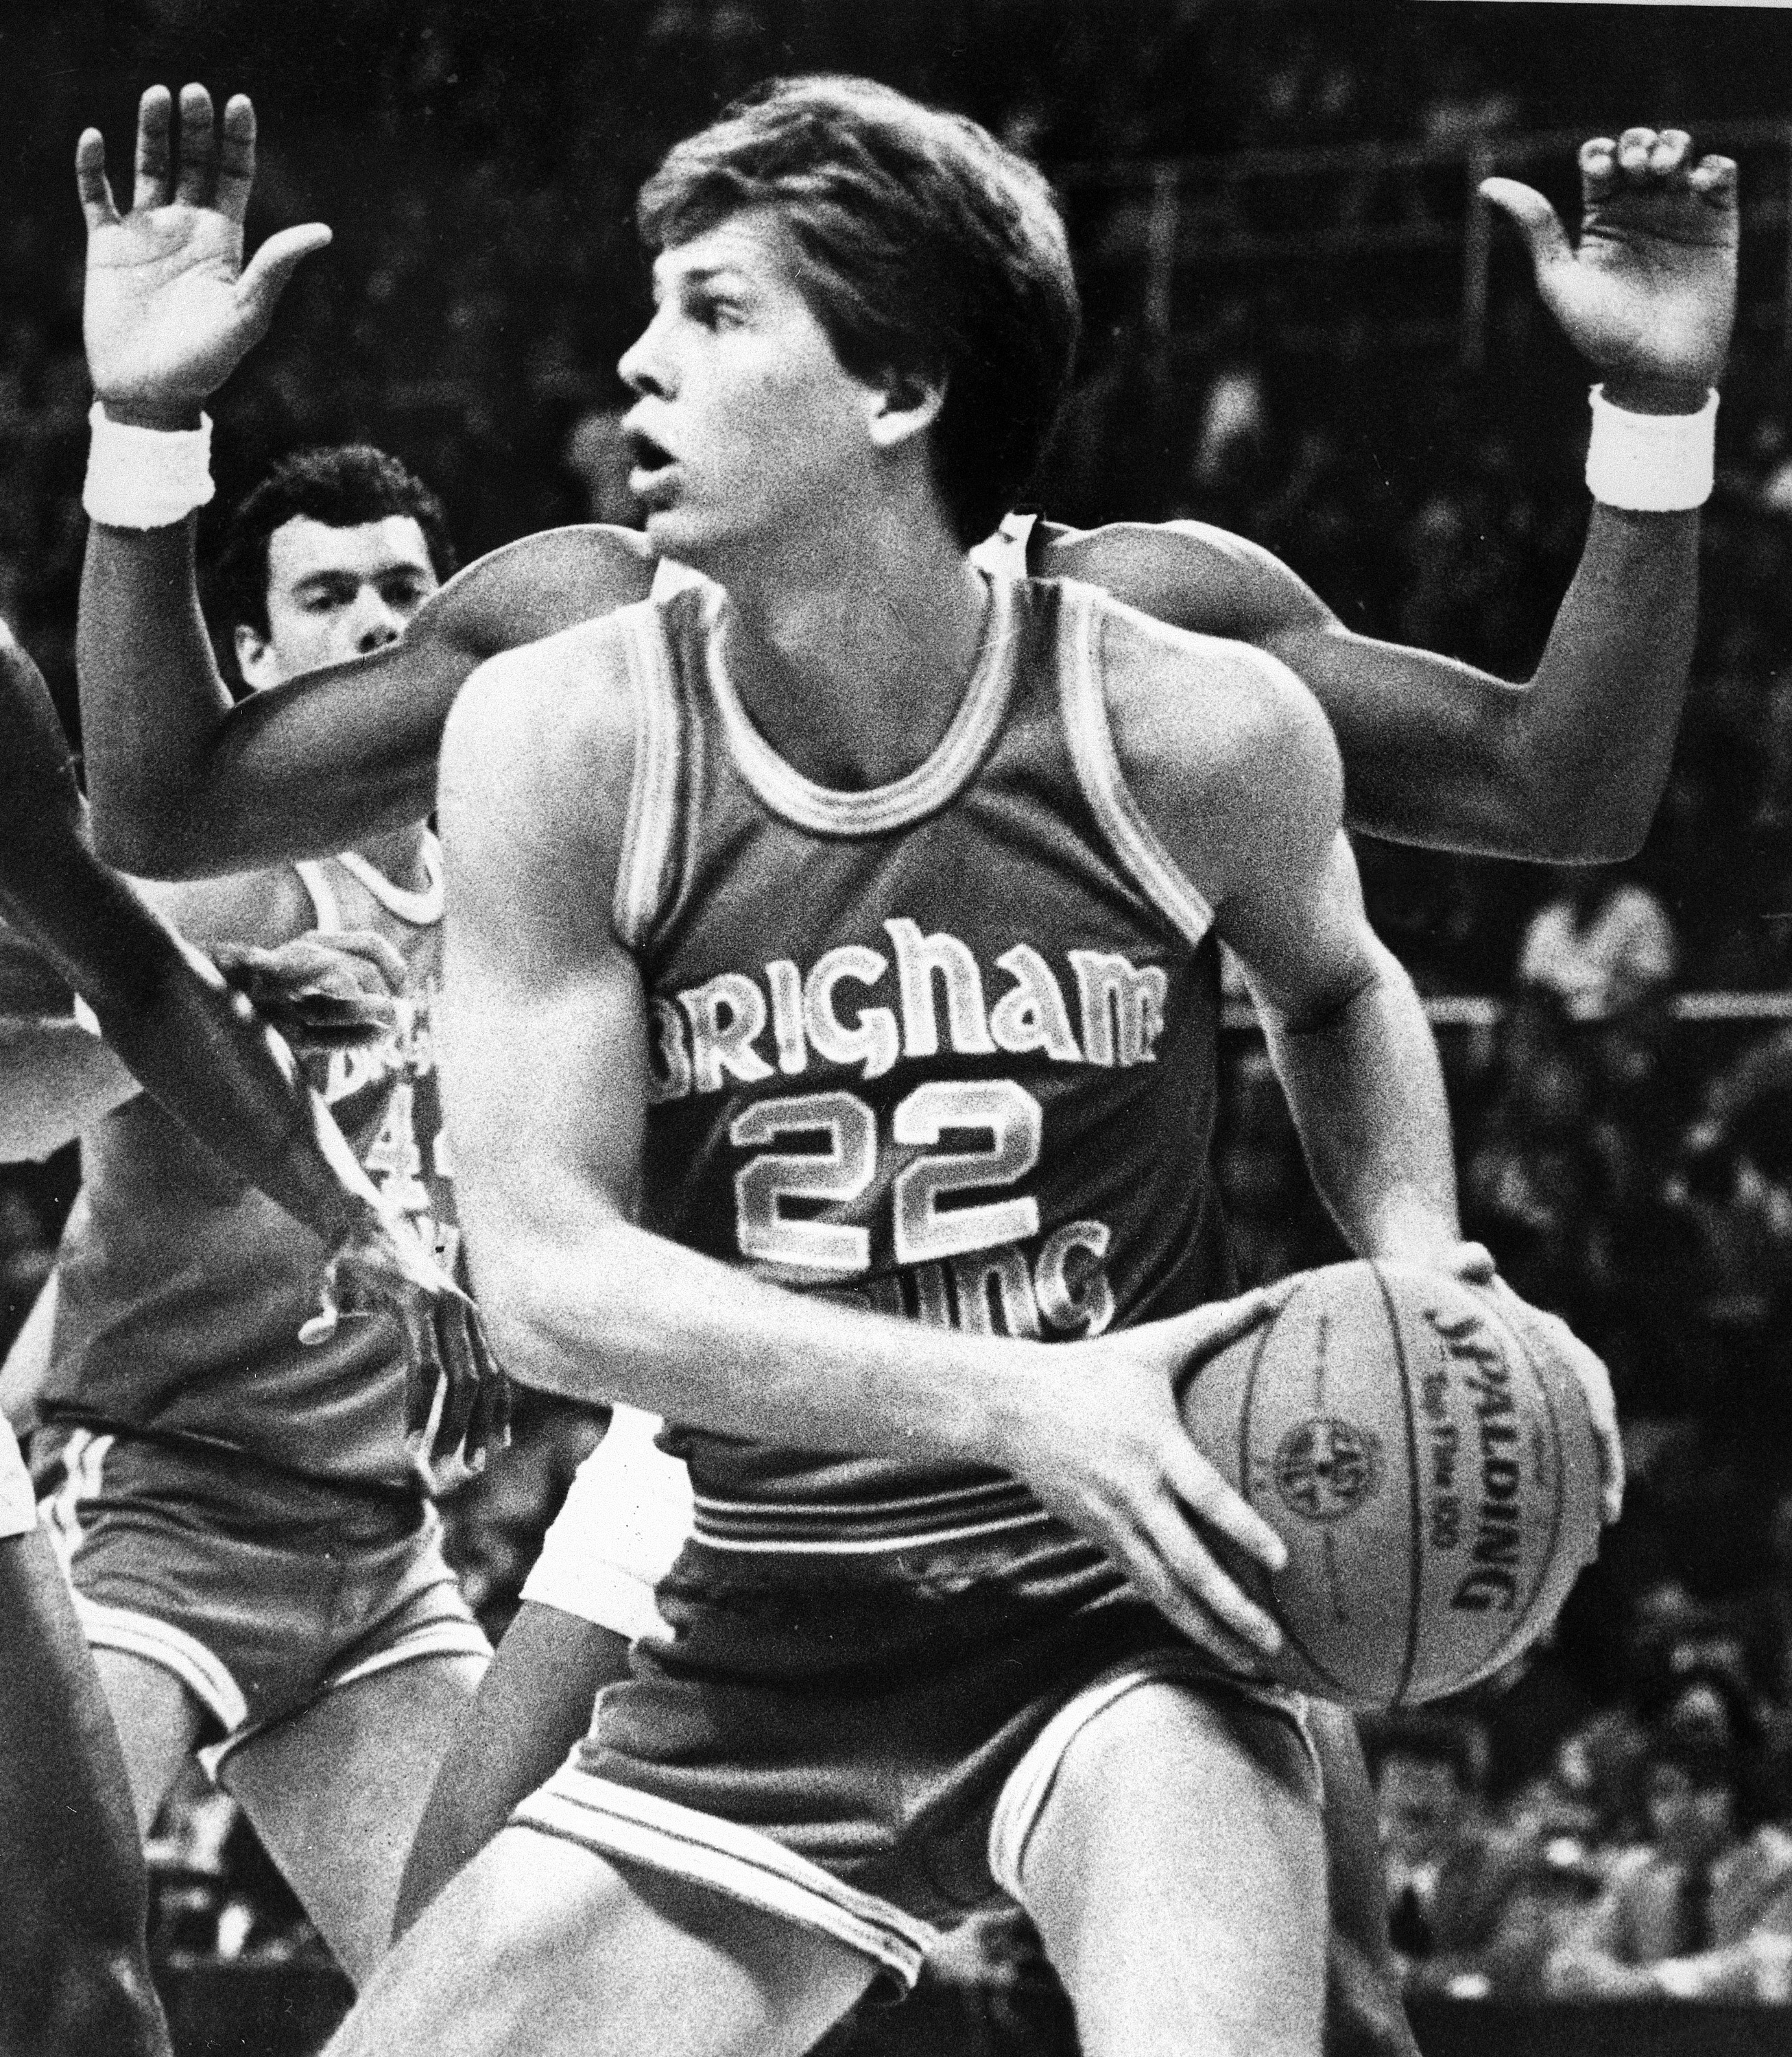 Brigham Young University’s Danny Ainge goes to the basket in a black and white photograph